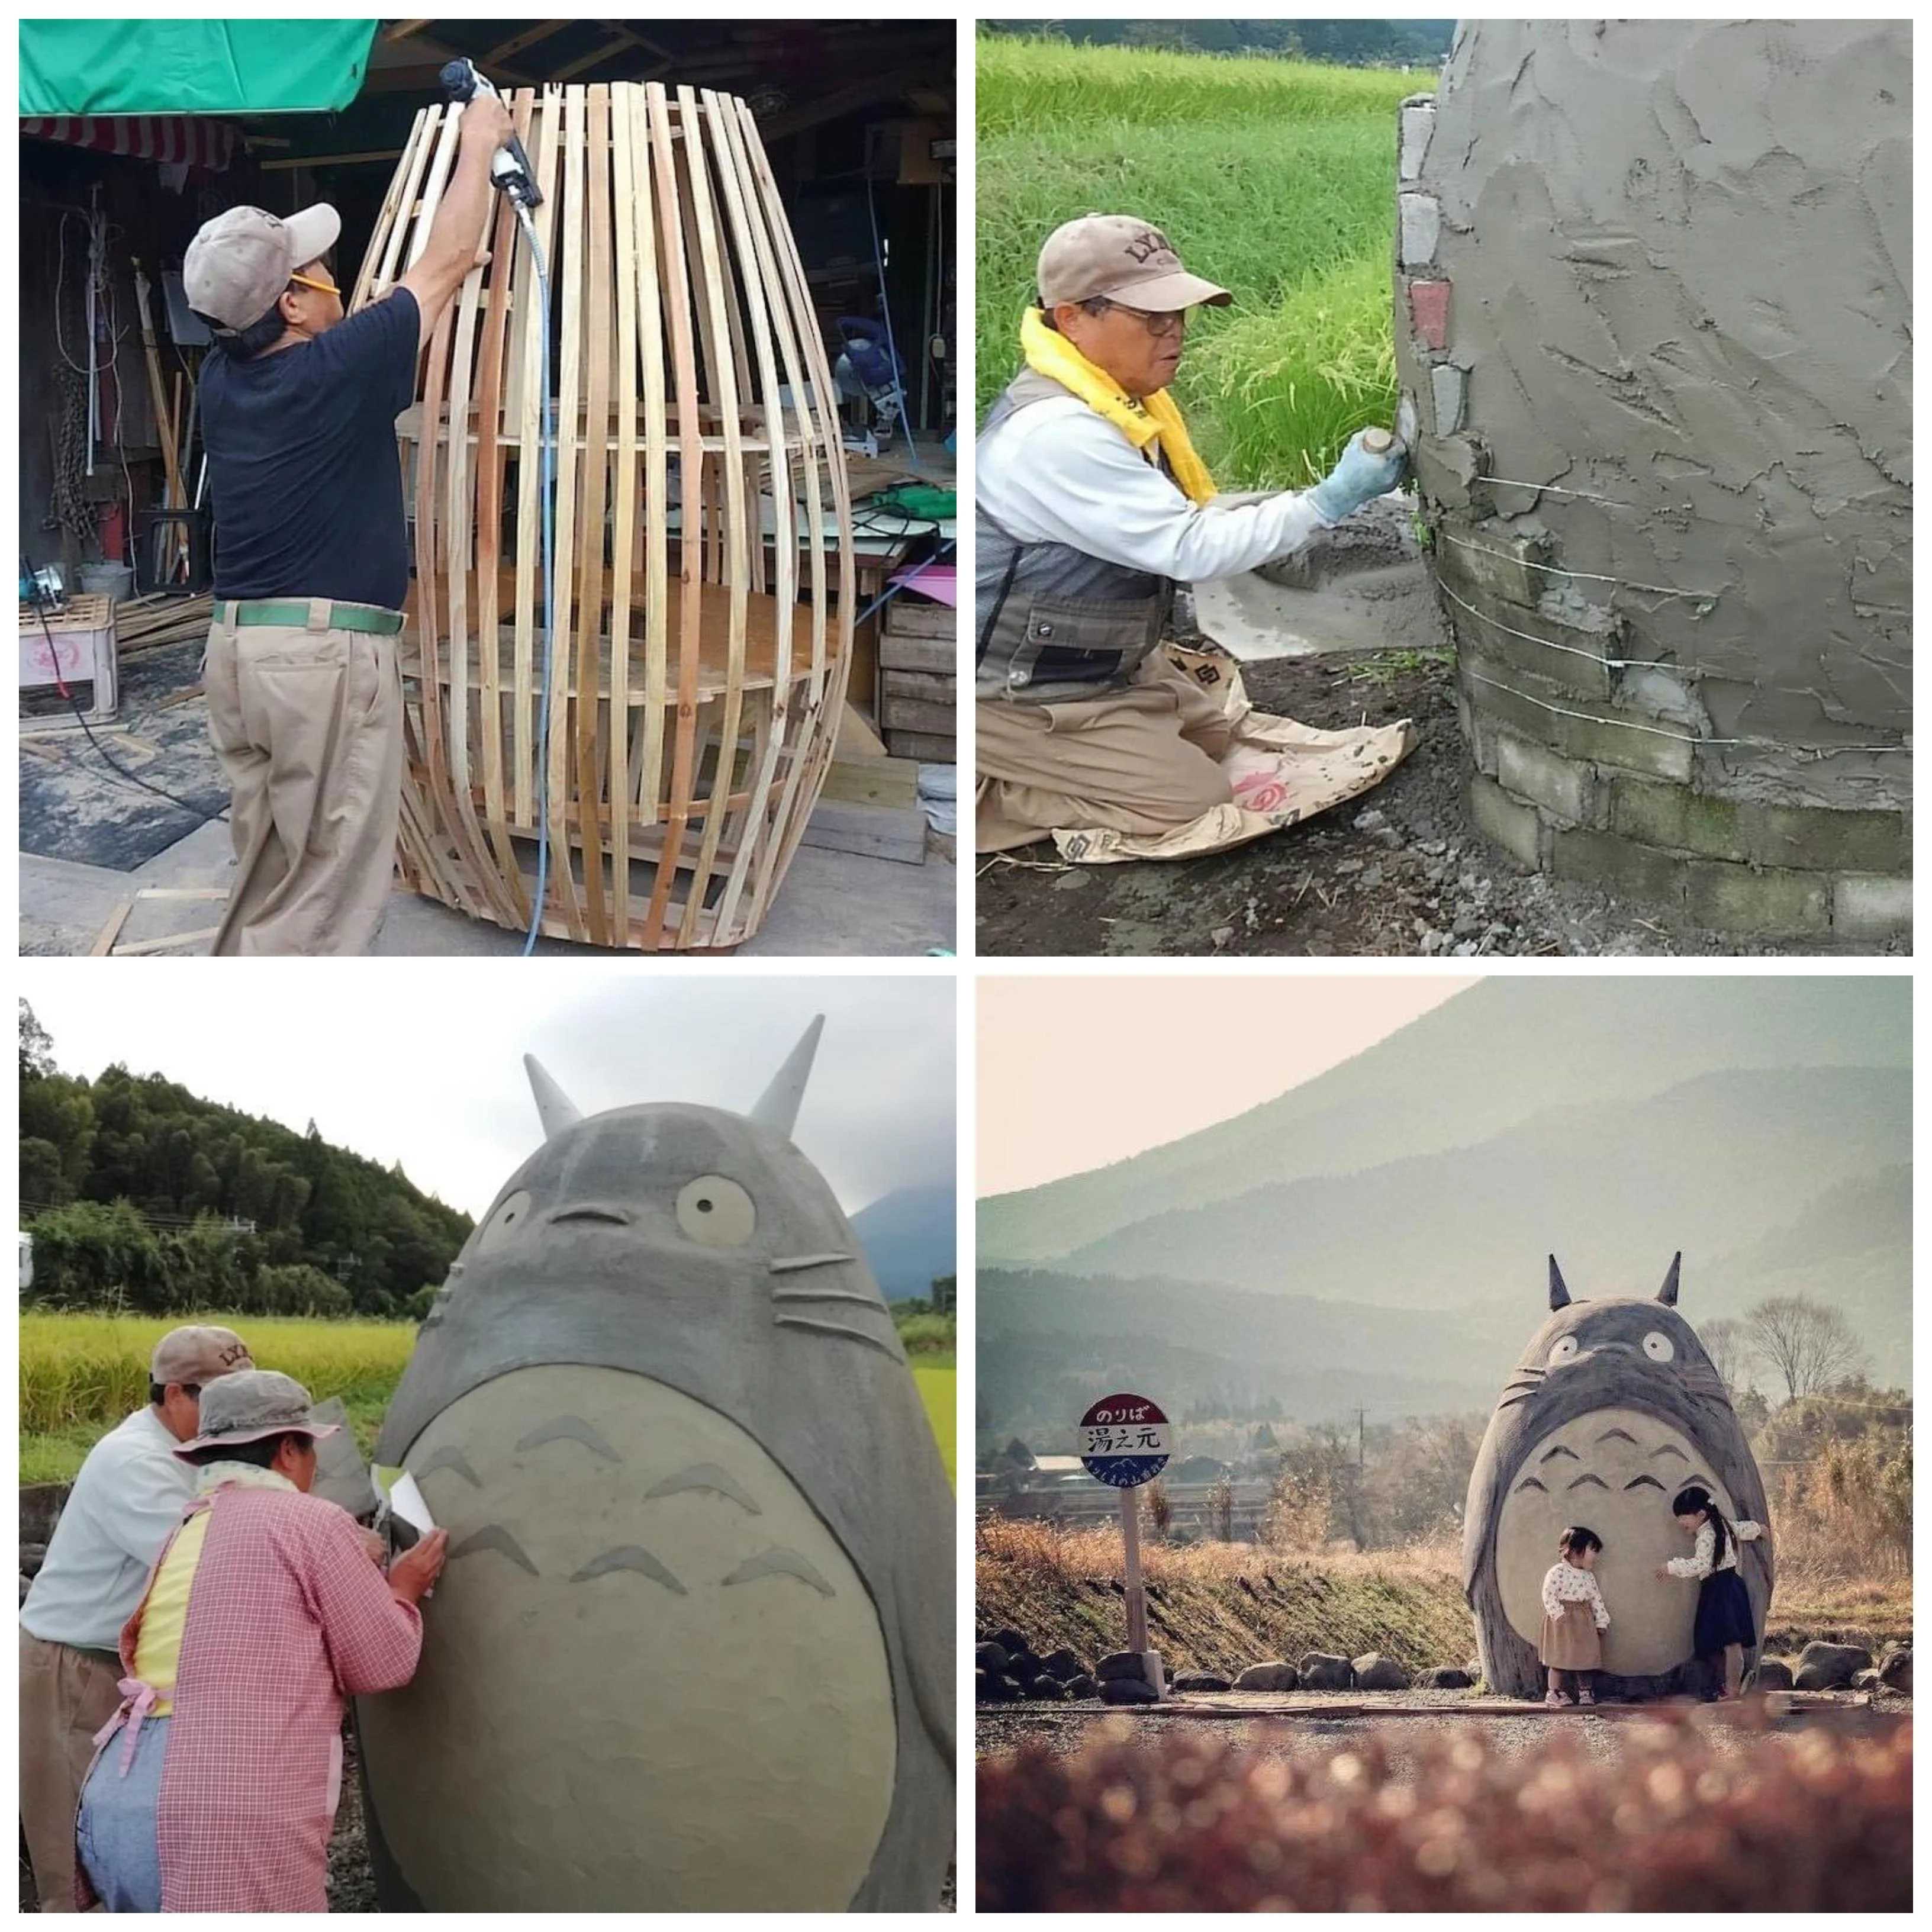 Japanese Grandparents Sculpted A Life-Size Totoro That Functions As Bus Stop For Their Grandkids